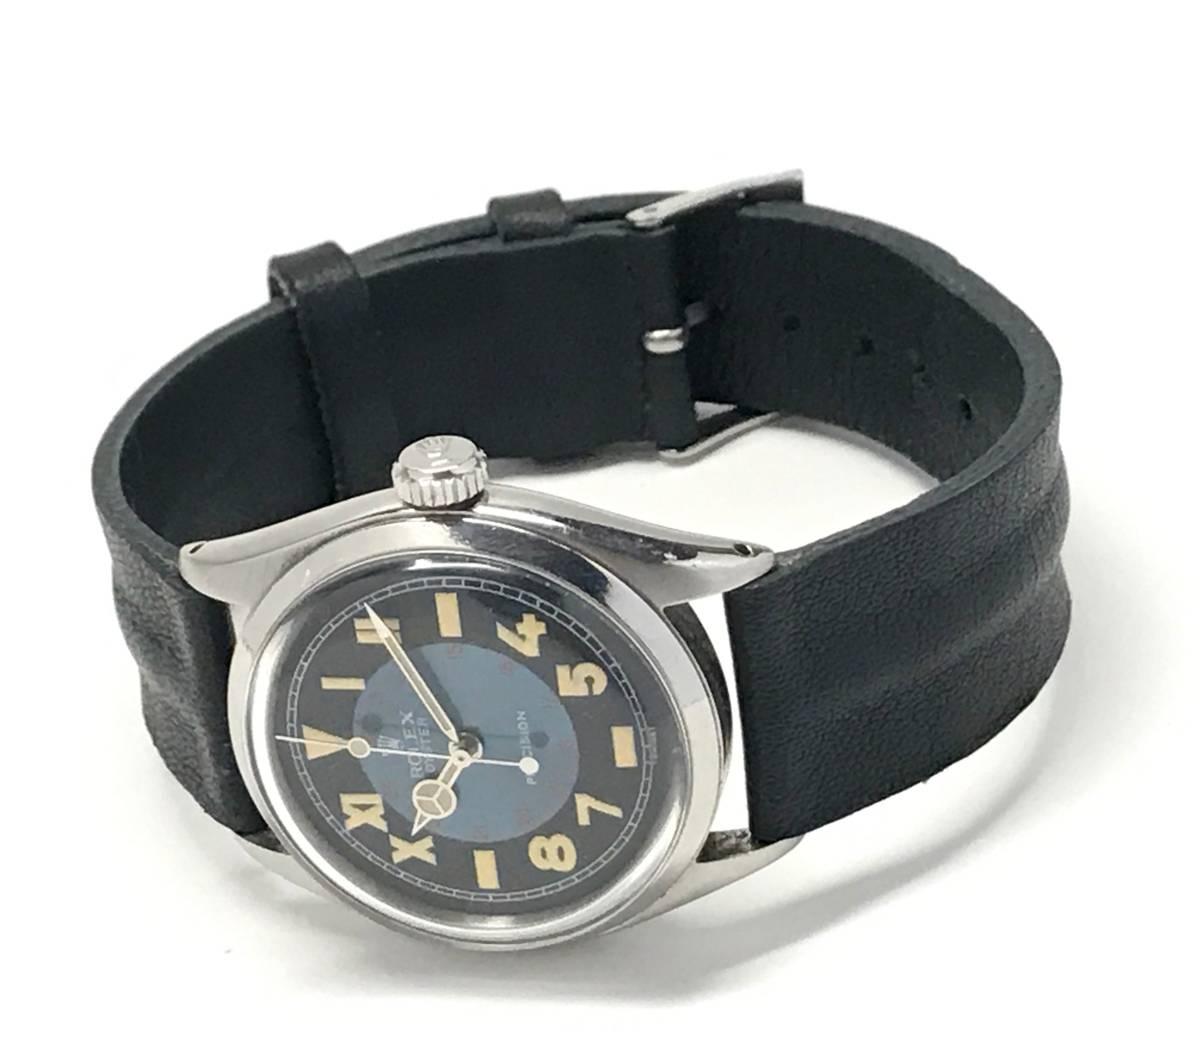 Mid-20th Century Vintage Oyster Unisex Rolex Wristwatch with California Military Dial